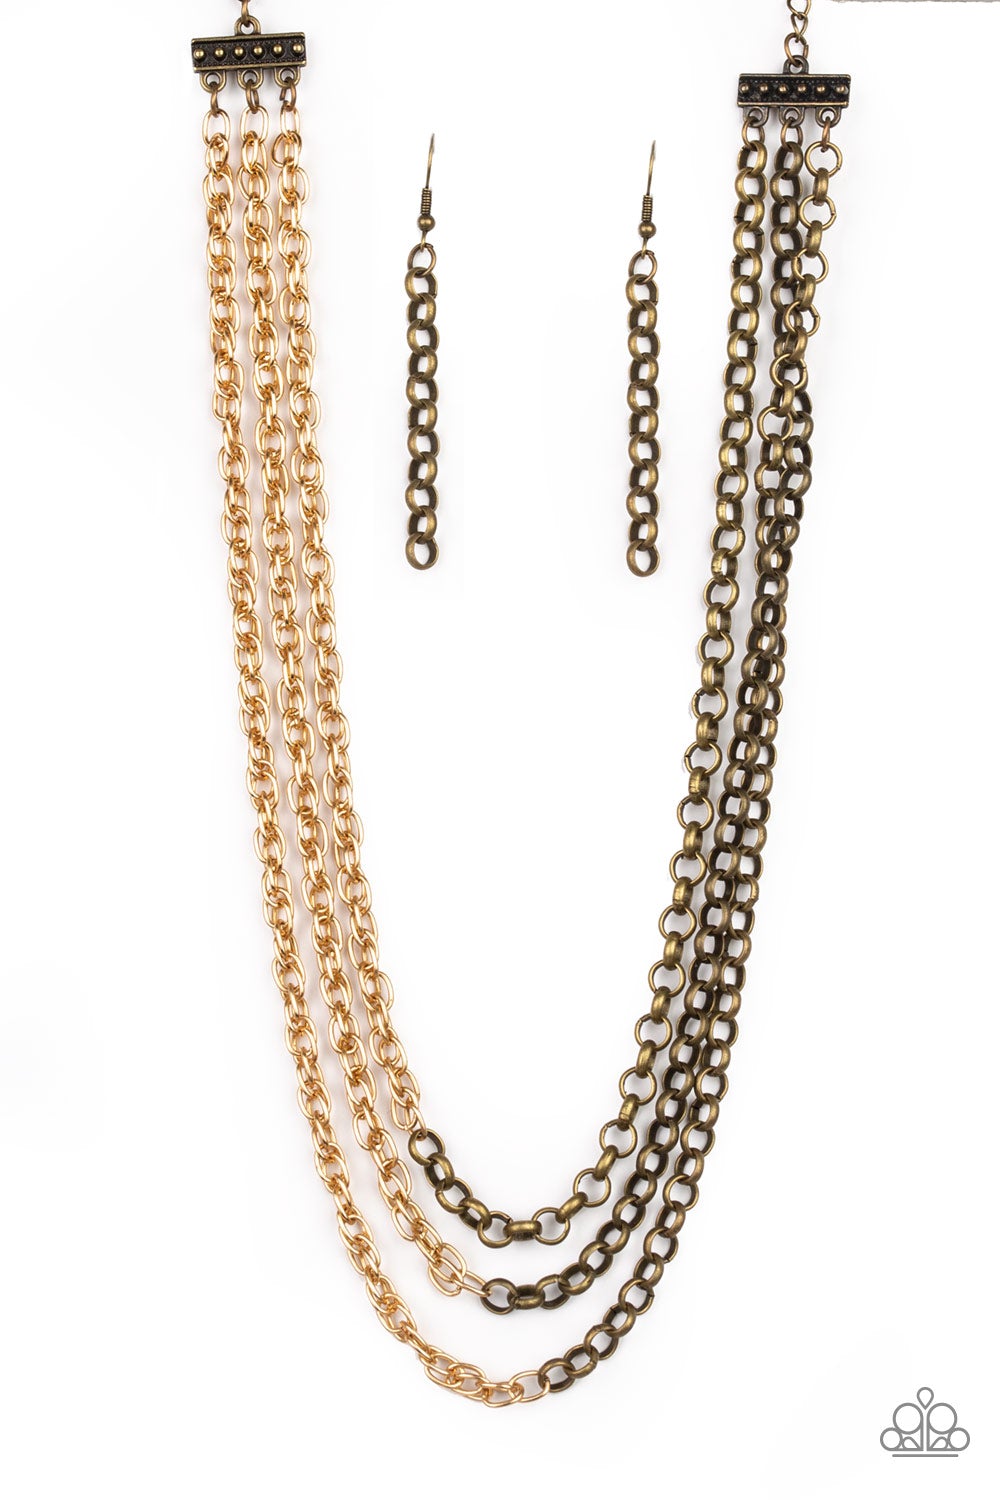 Paparazzi Accessories - Metro Madness #N230 Peg - Gold/Brass Necklace